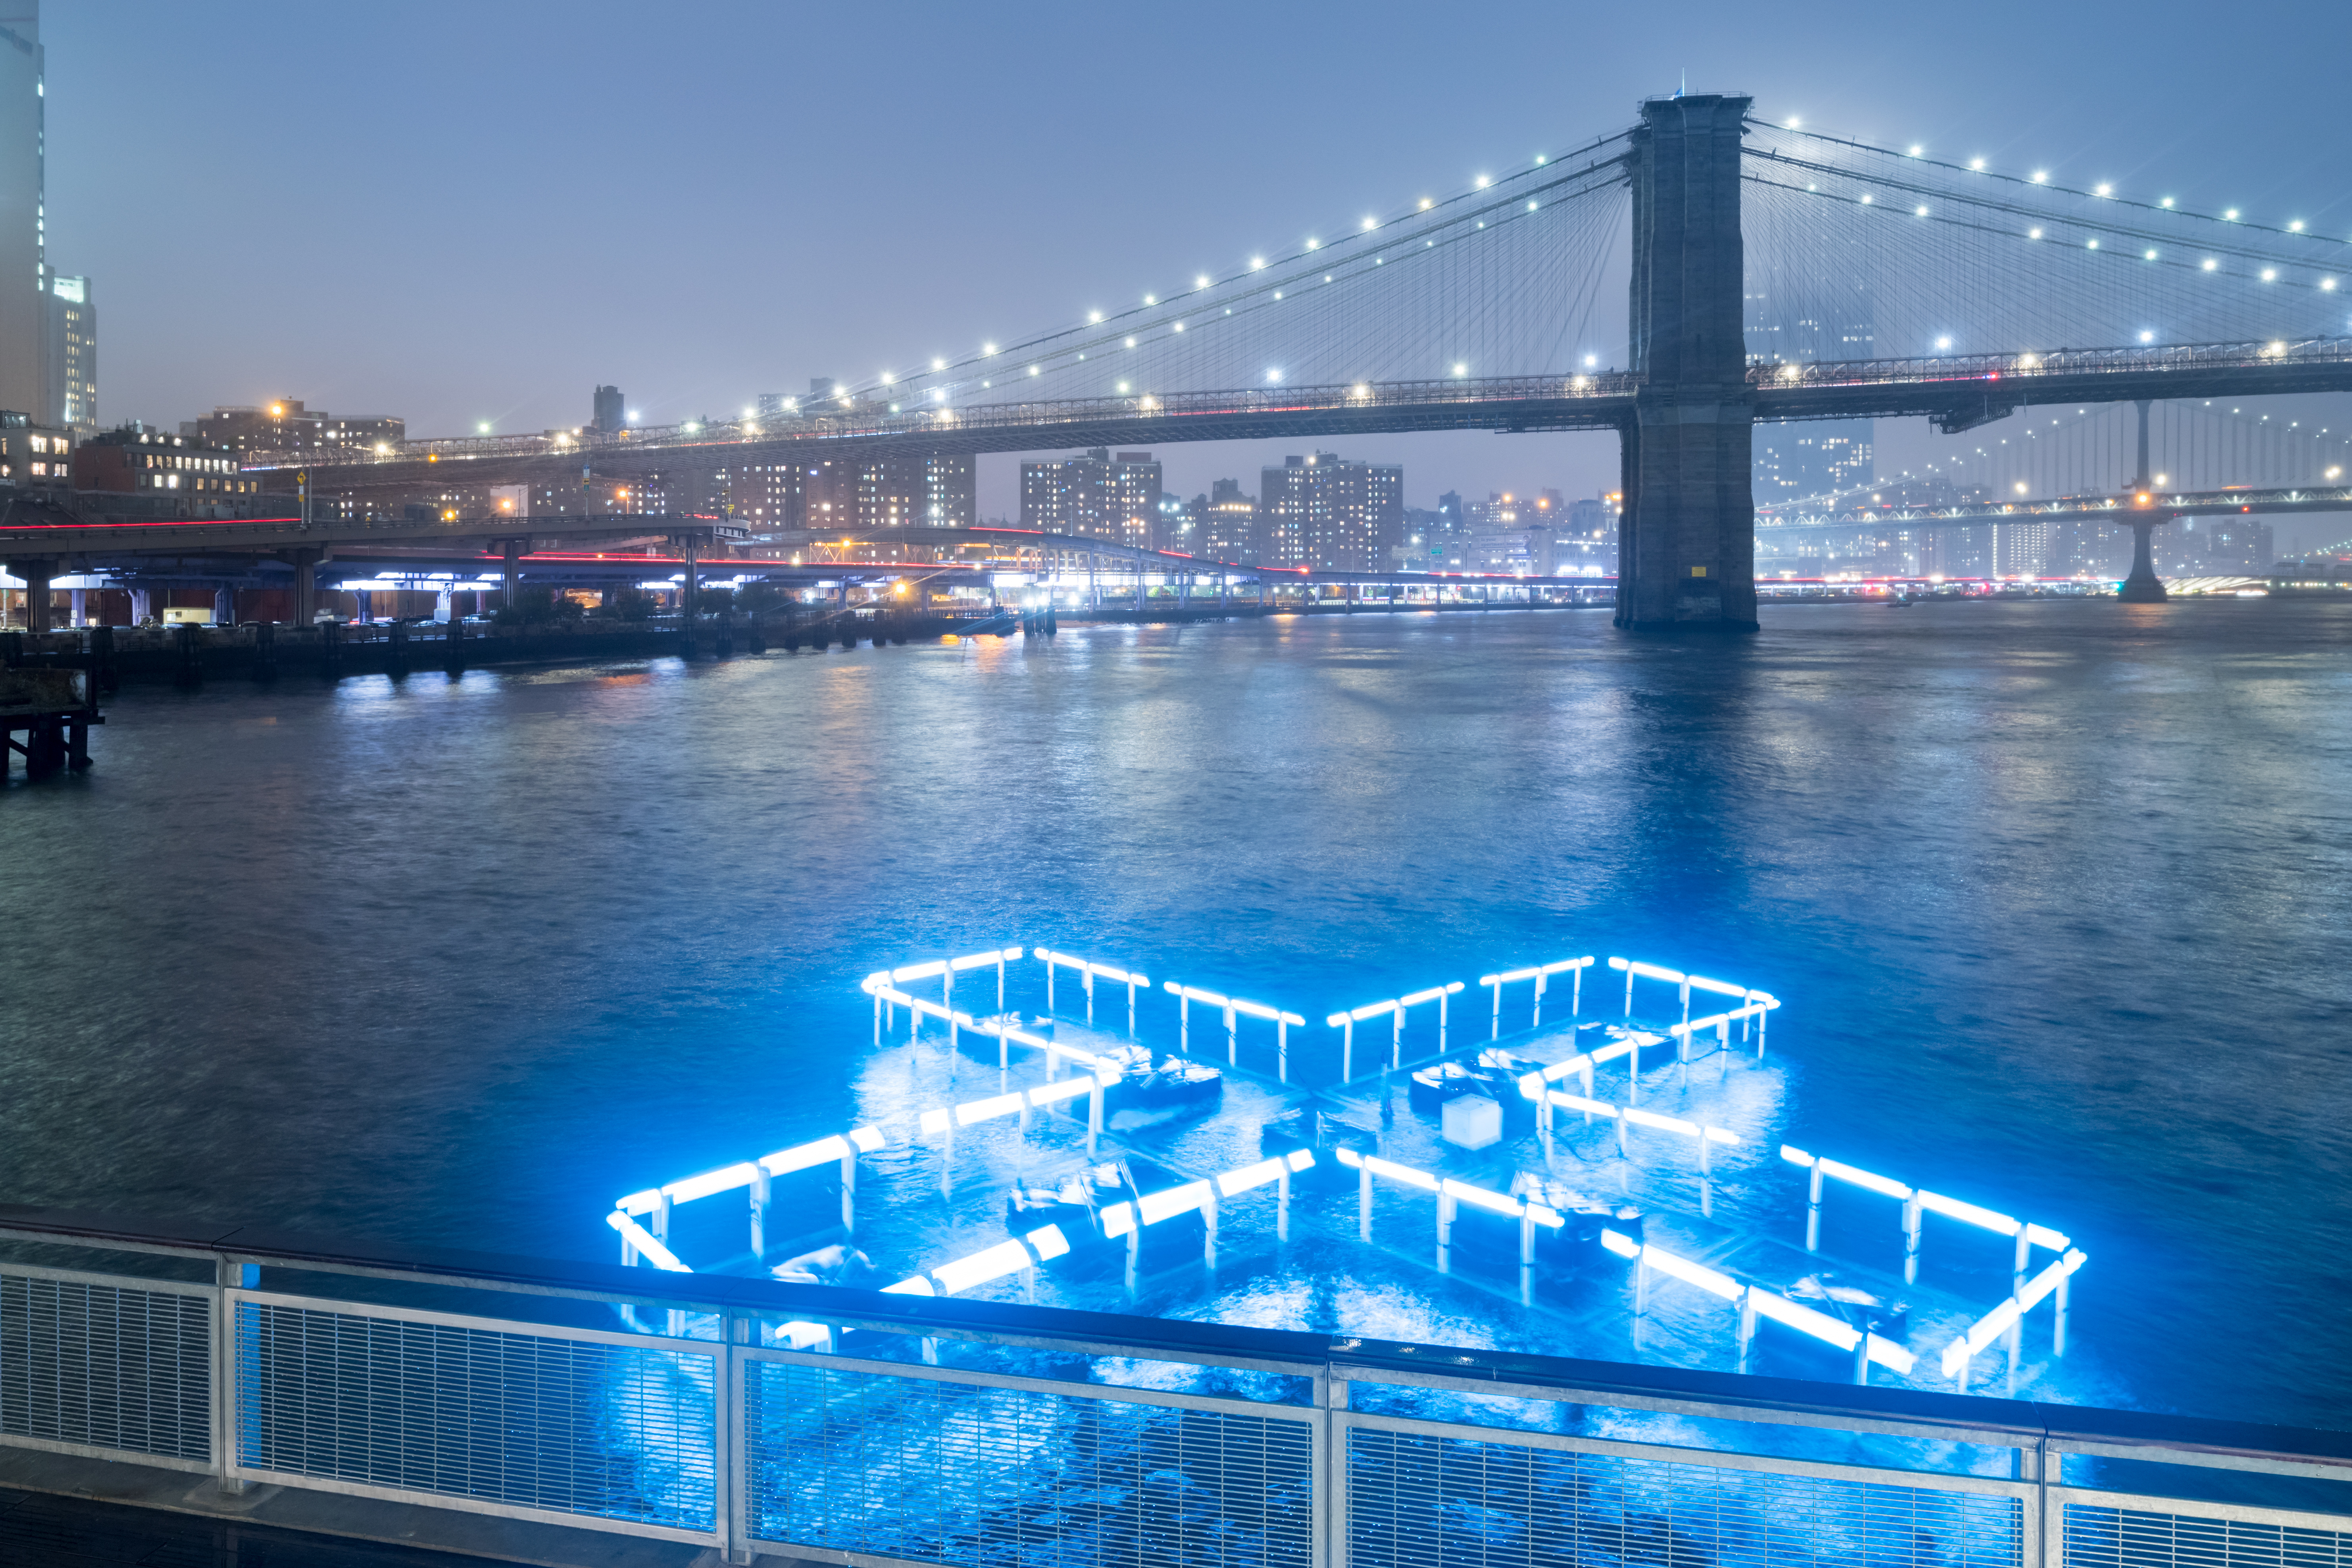 2_+ POOL Light. Designed by PLAYLAB, INC. and Family New York in collaboration with Floating Point. Photo by Iwan Baan